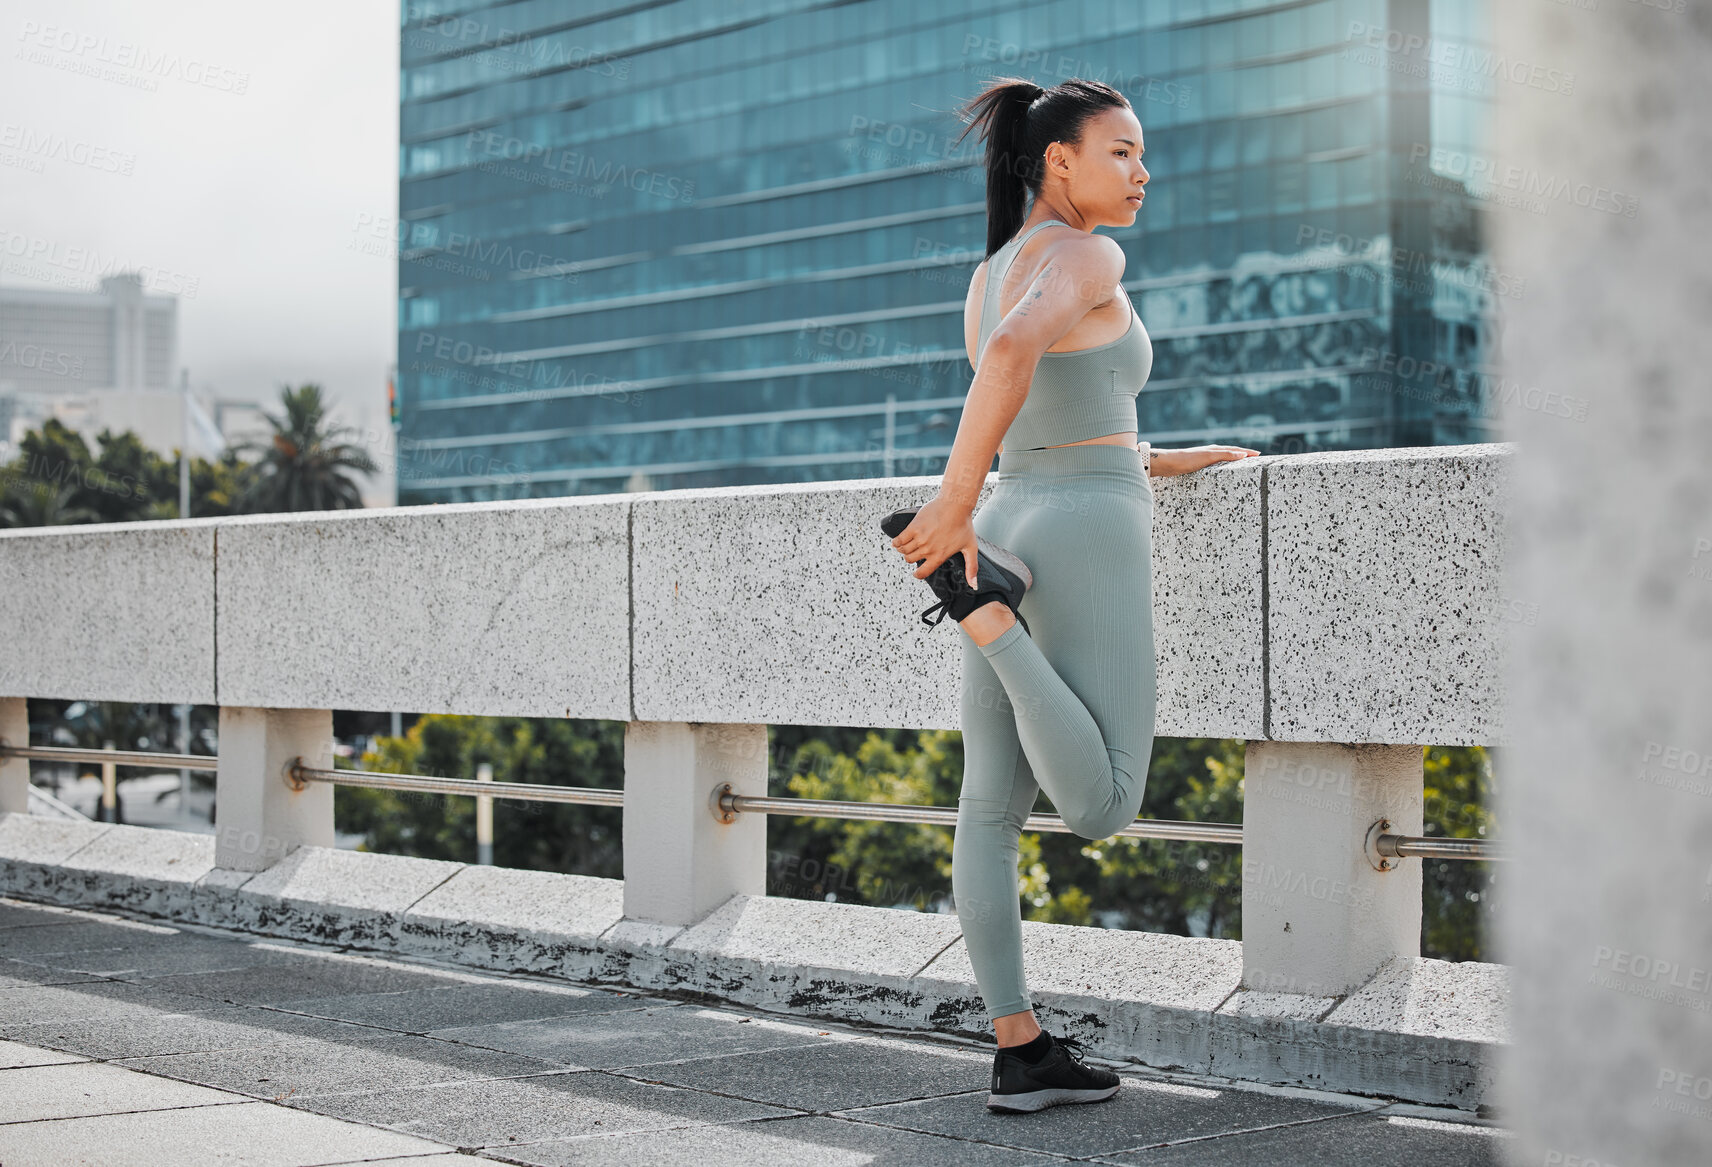 Buy stock photo One fit young woman wearing workout clothes and stretching her legs while standing on a bridge and looking at the view in the city. Hispanic athlete focused on health and wellness and getting ready for a workout downtown